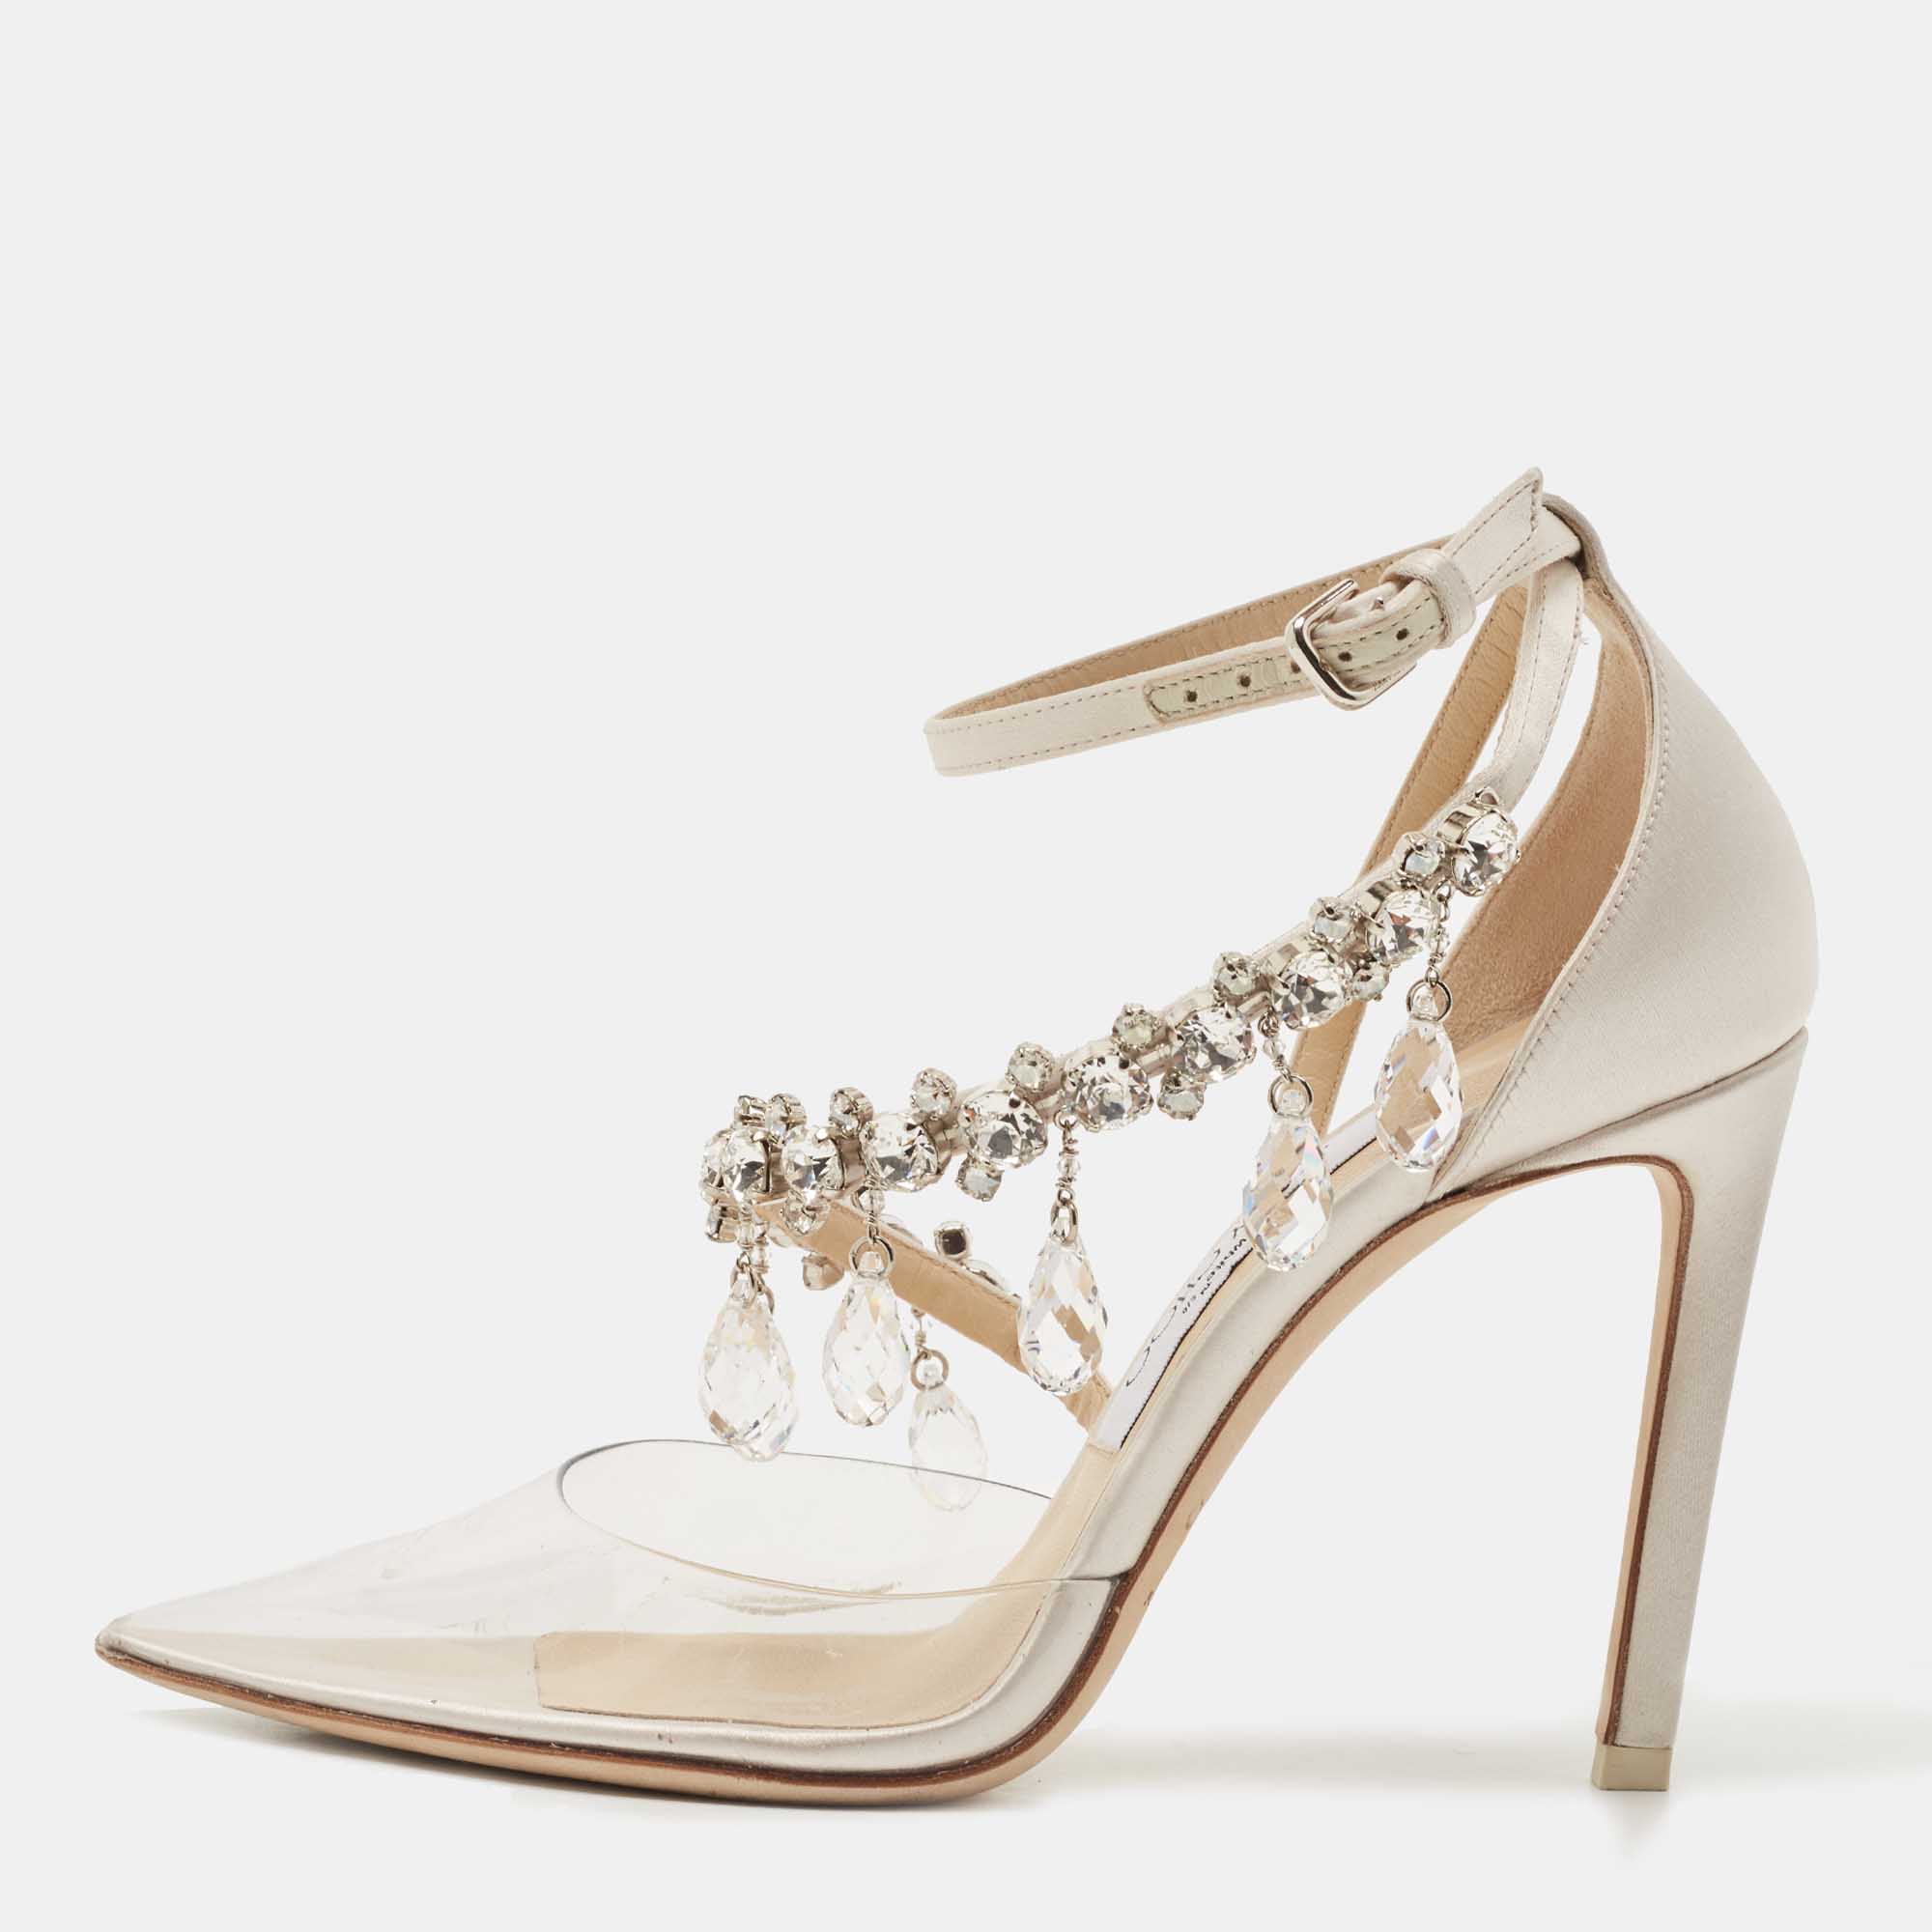 Off-White X Jimmy Choo White/Transparent Satin And PVC Victoria Crystal Embellished Pumps Size 36.5